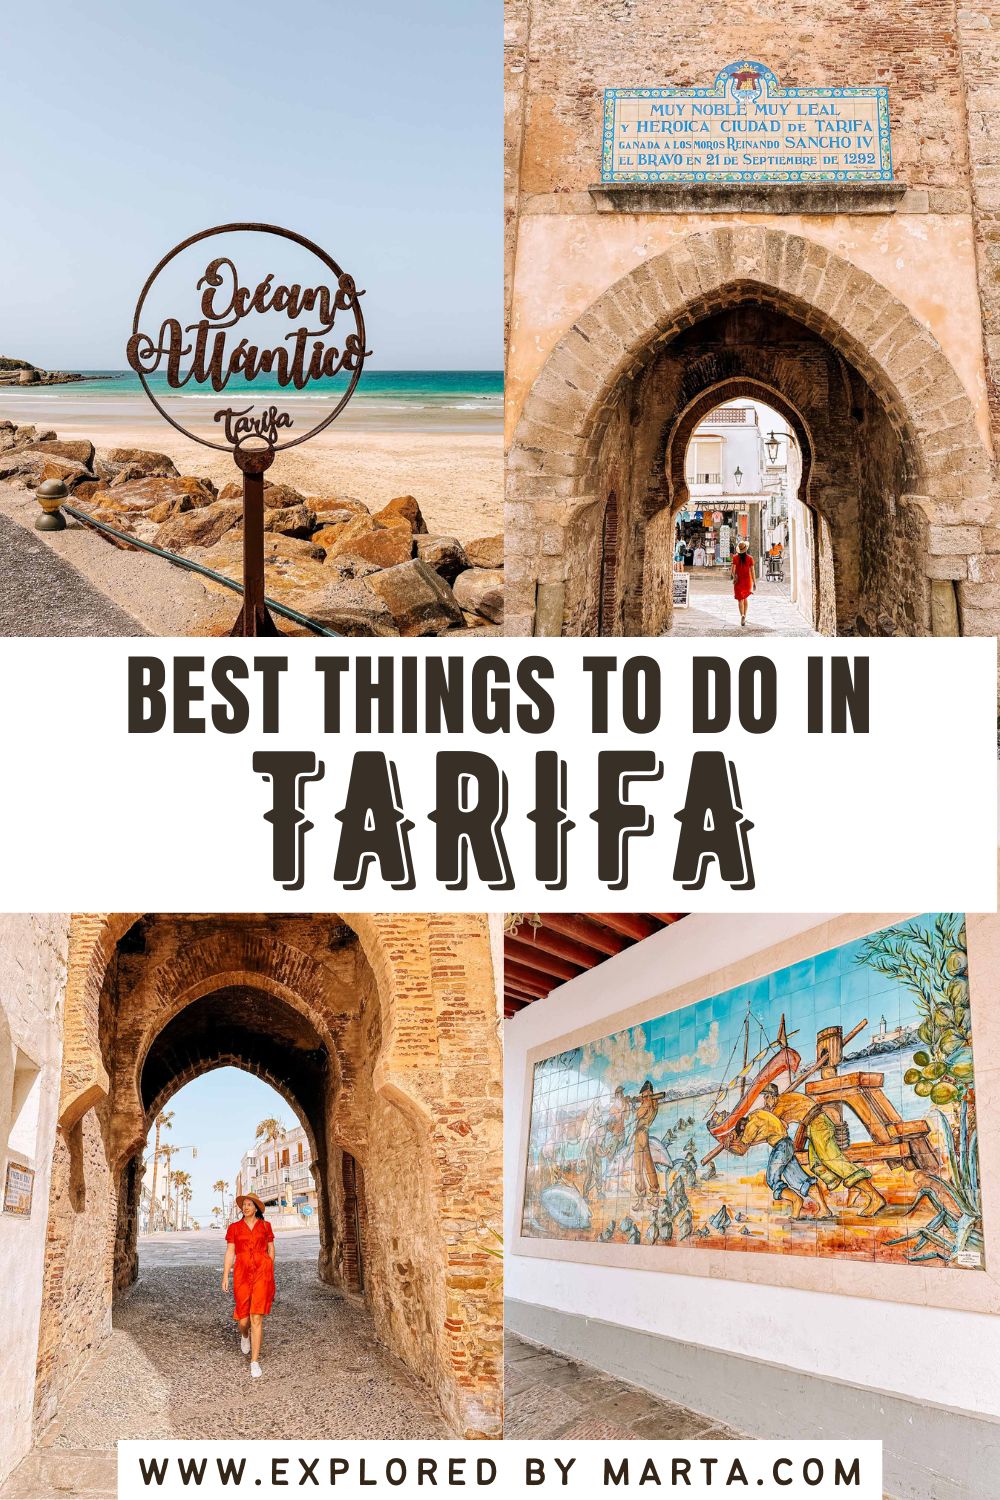 Top things to do in Tarifa in 1 day